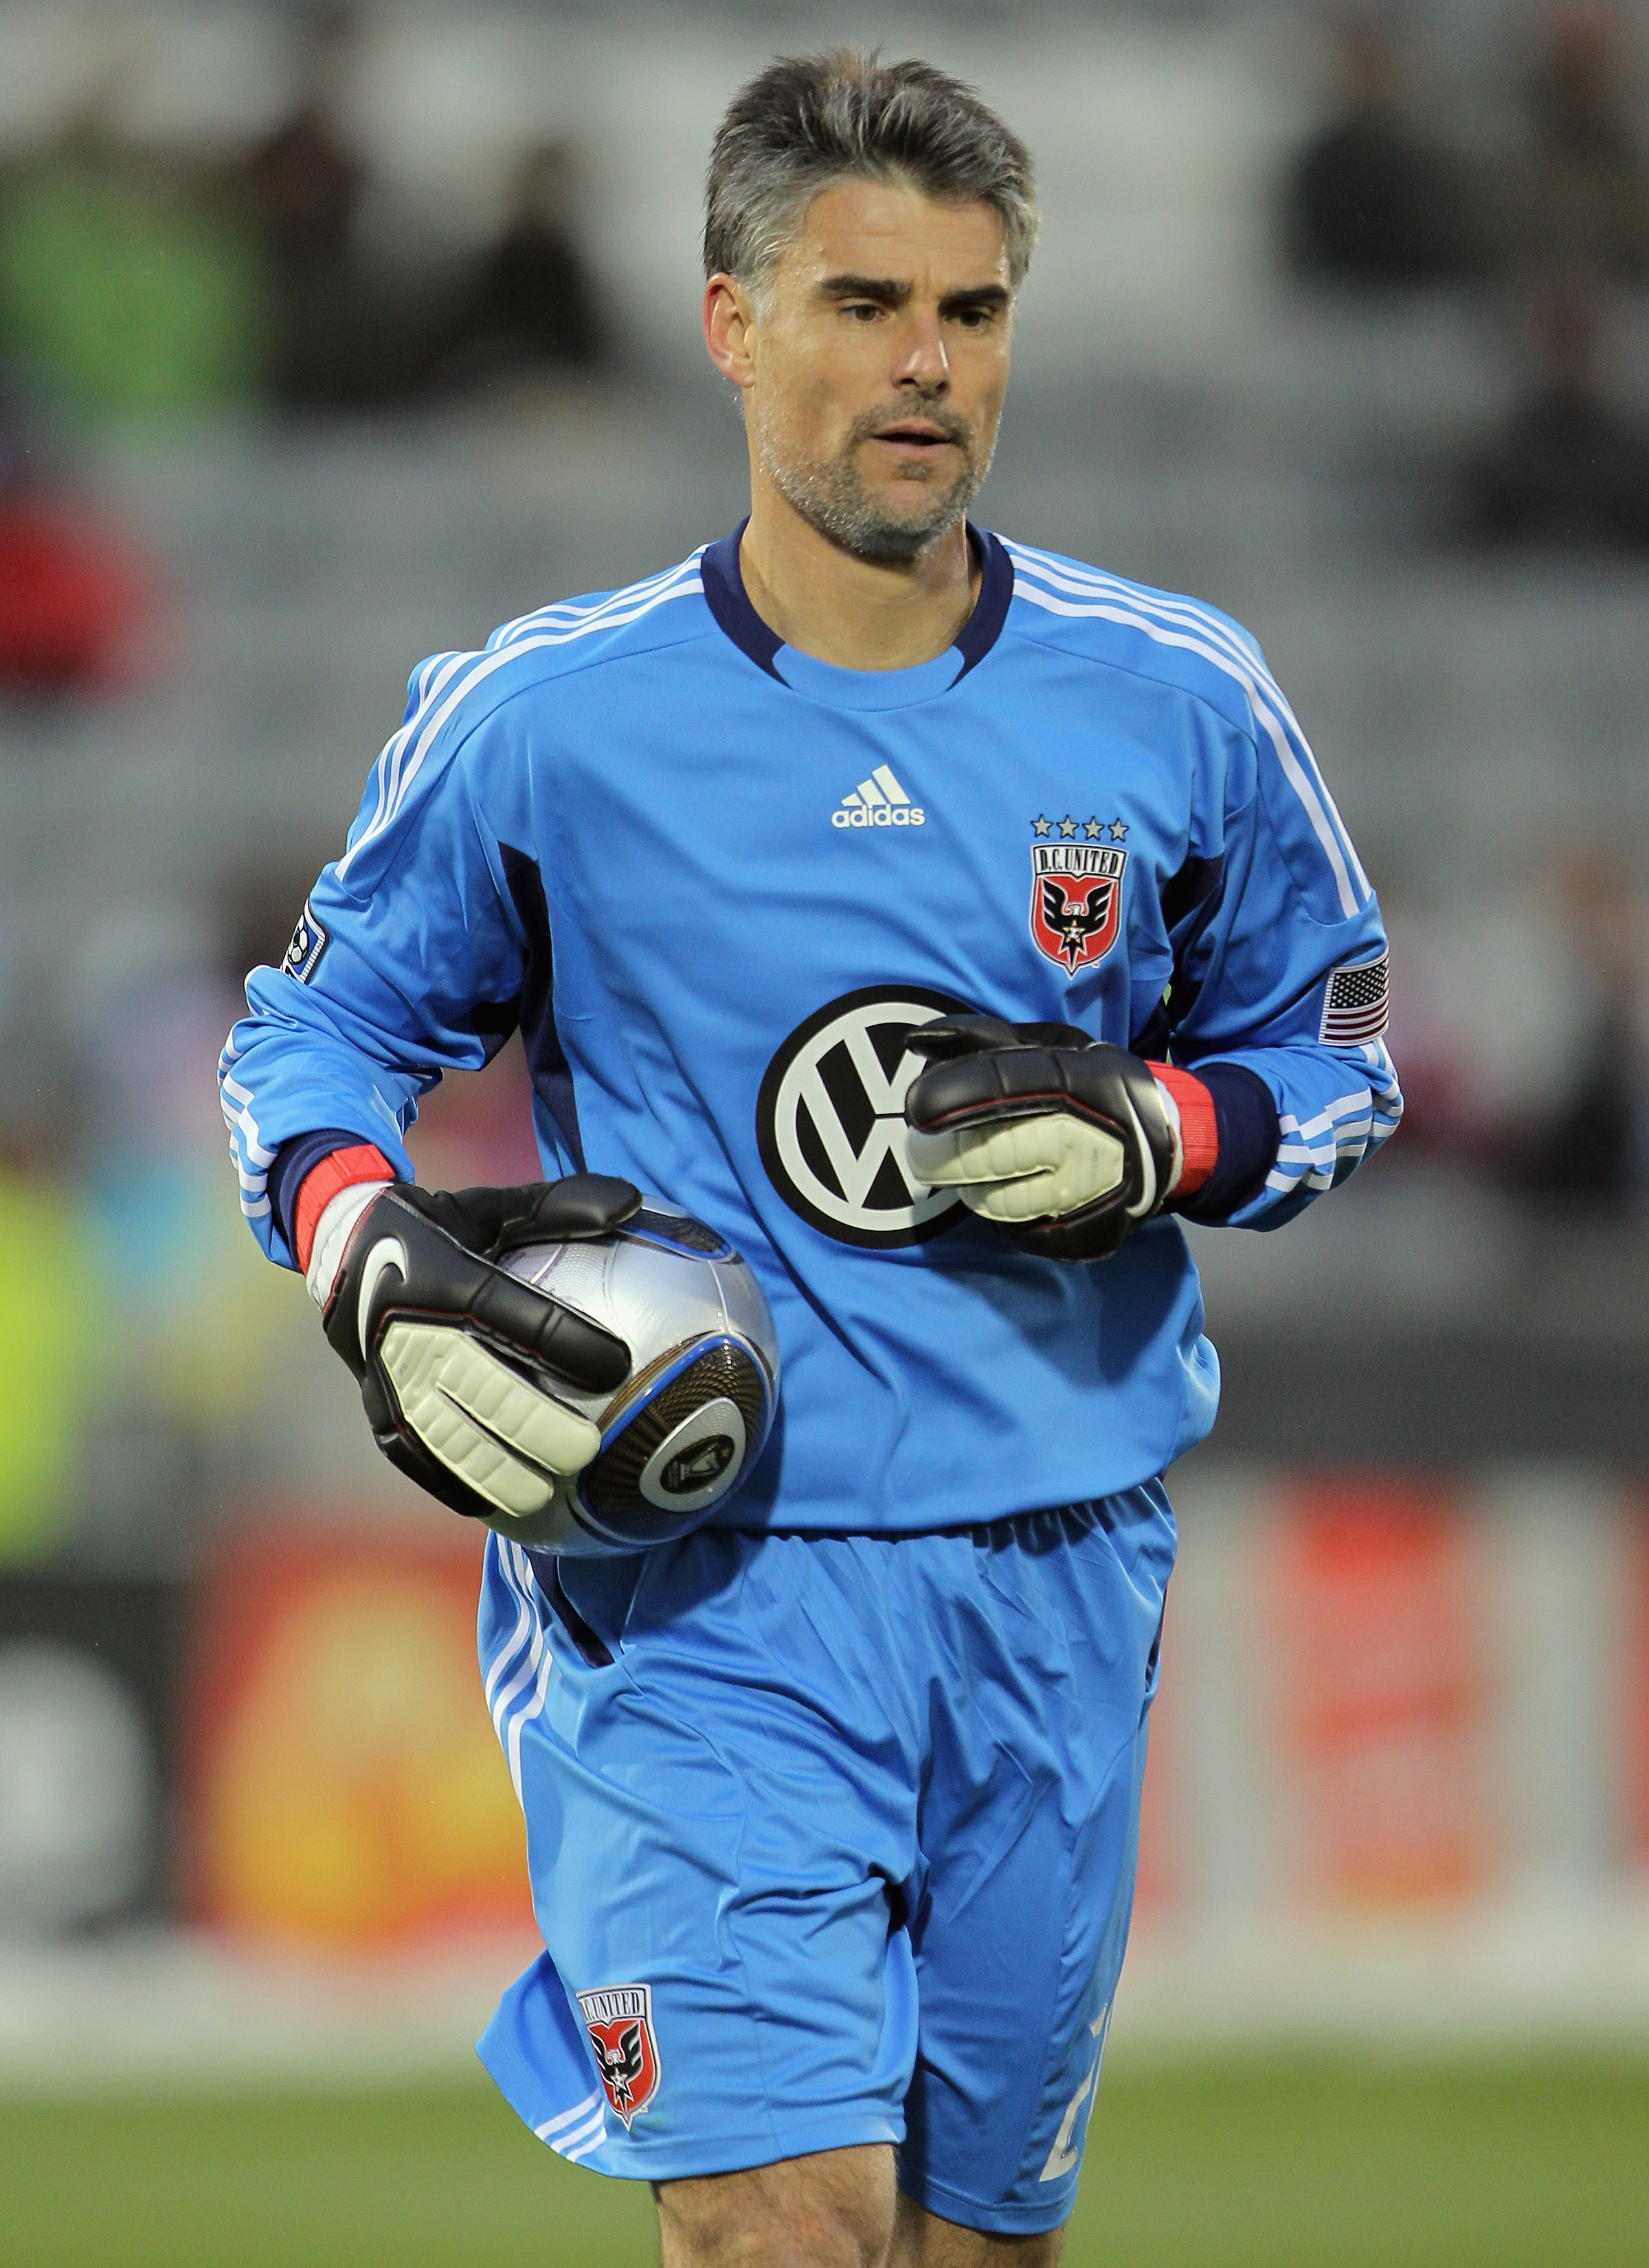 COMMERCE CITY, CO - APRIL 03:  Goal keeper Pat Onstad #20 of D.C. United defends the goal against the Colorado Rapids at Dick's Sporting Goods Park on April 3, 2011 in Commerce City, Colorado. The Rapids defeated D.C. United 4-1.  (Photo by Doug Pensinger